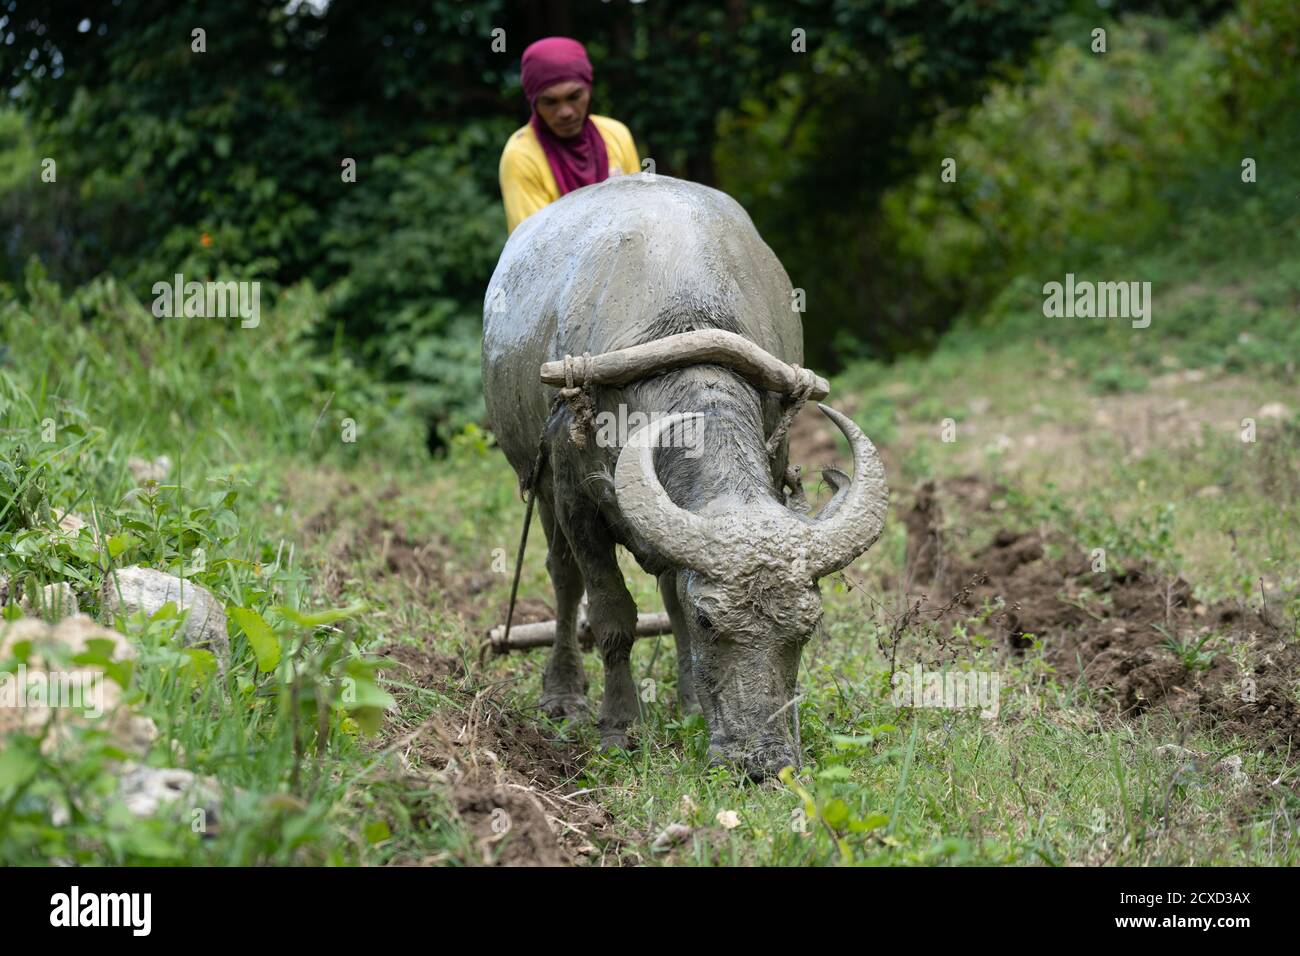 A Filipino farmer using a Carabao to plough the land ready for planting vegetables. Provincial mountain area, Cebu, Philippines Stock Photo